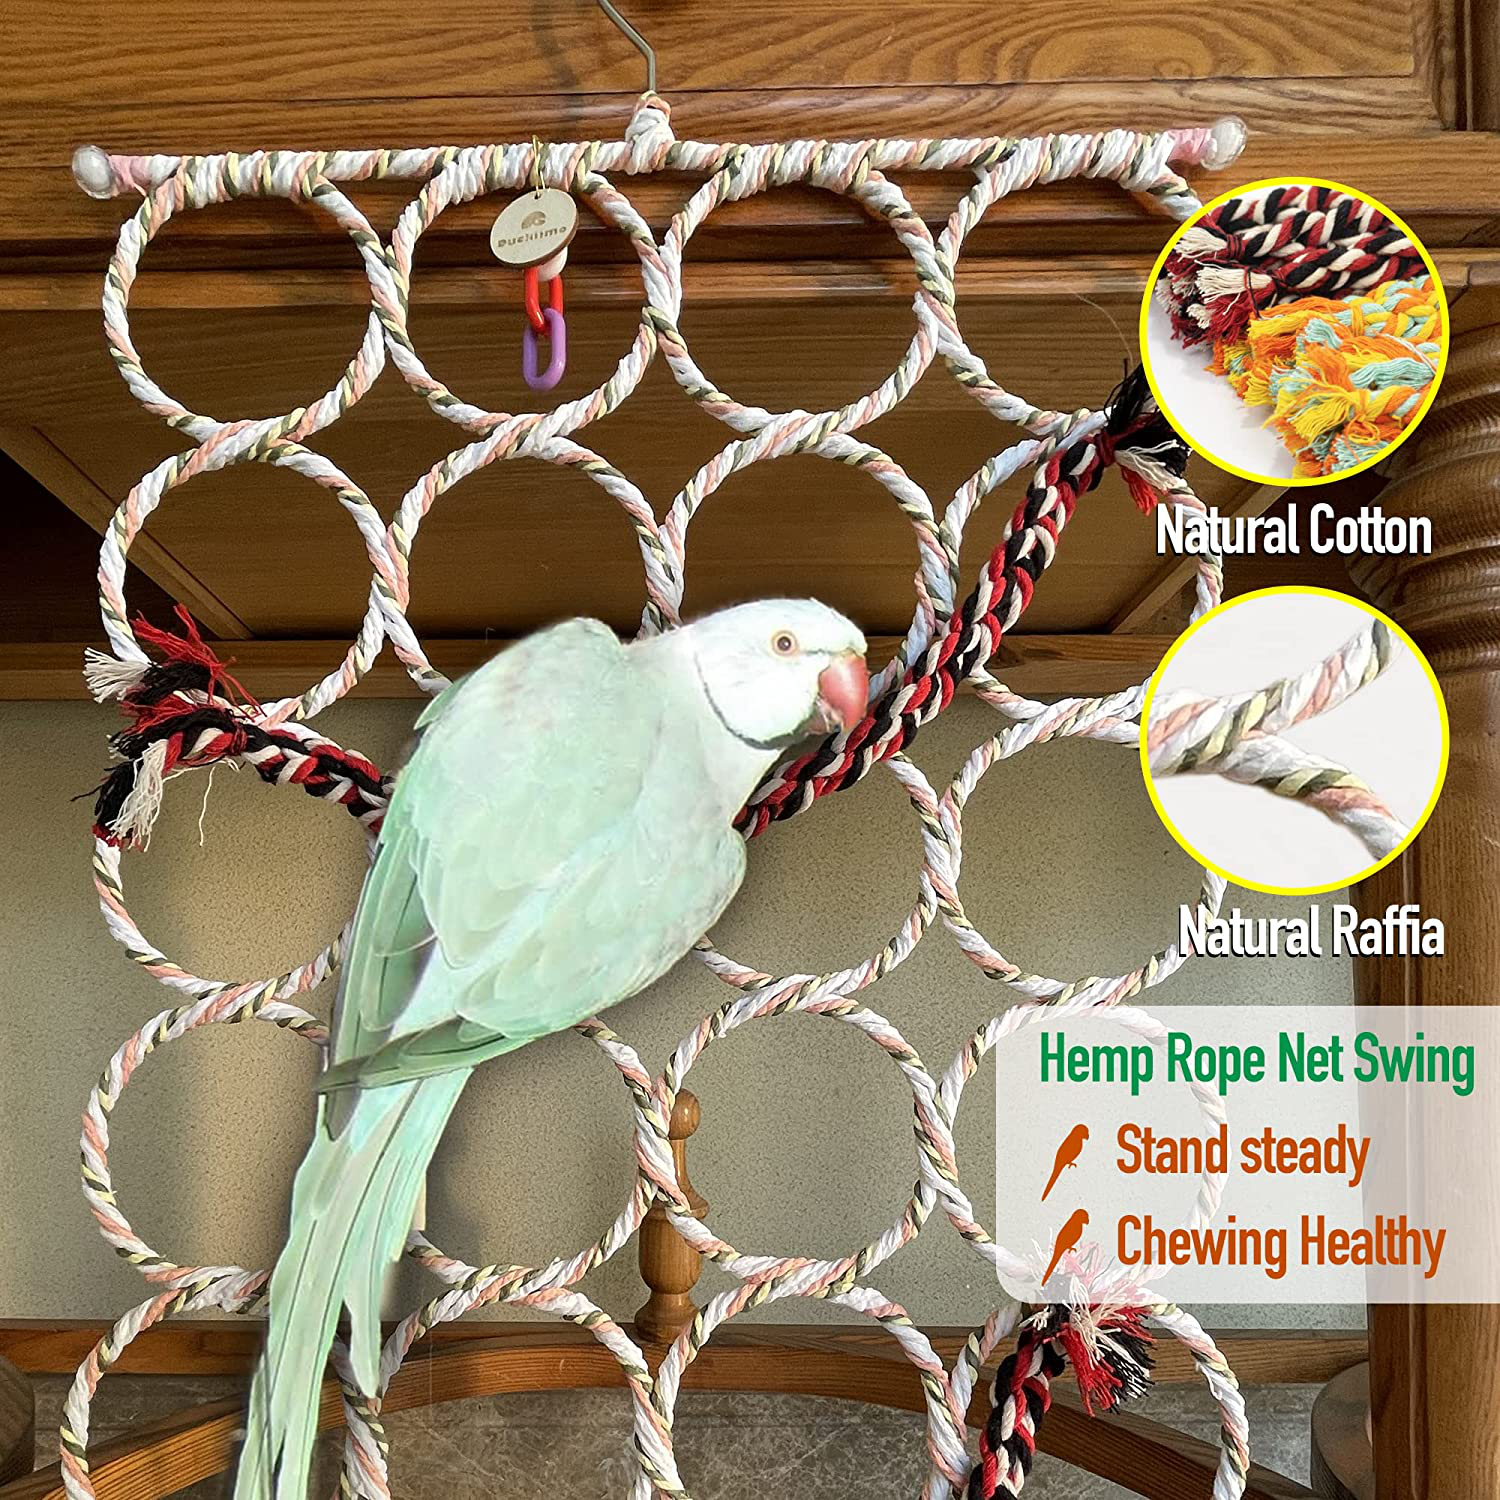 Duckiimo 3Pack Parrot Climbing Net Toys-Bird Rope Ladder Bungee Toy-Bird Swing Hanging Cage-Perch Stand Chew Toys for Parrot, Cockatiel, Parakeets, Cockatoos, Budgies, Conure, Macaw